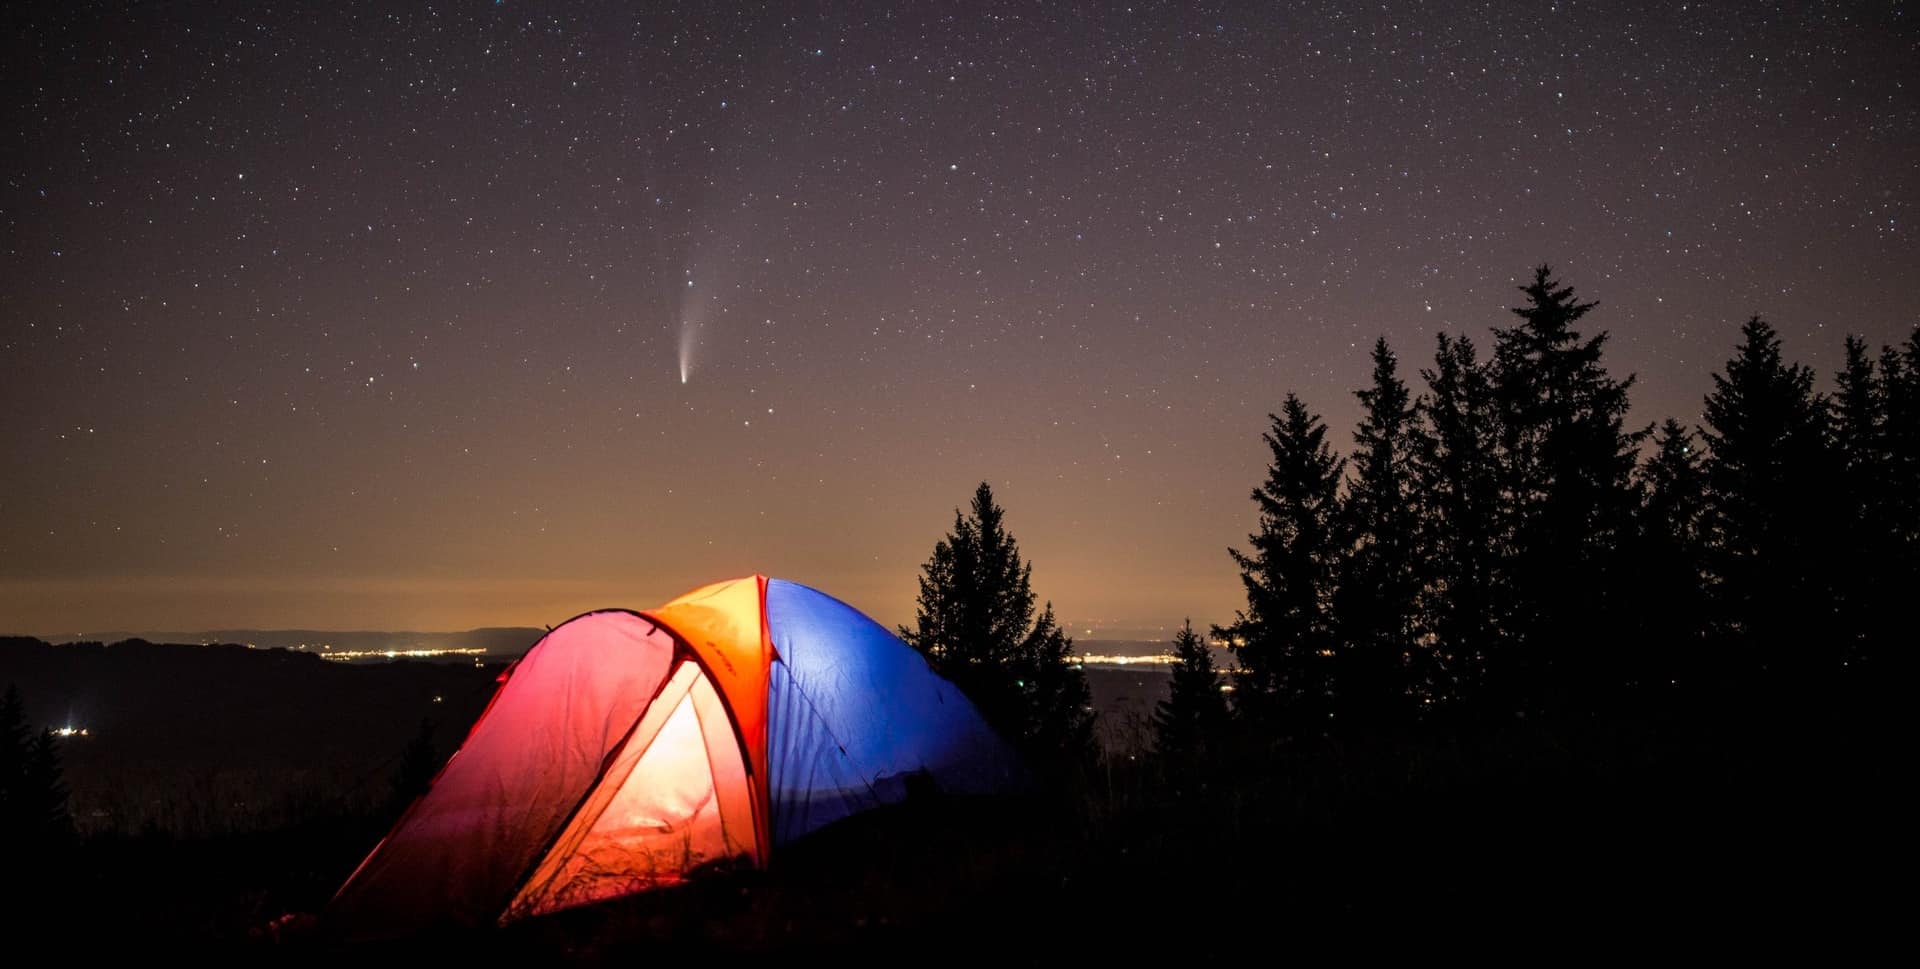 A red, blue and orange color camping tent set up at night under a starry sky